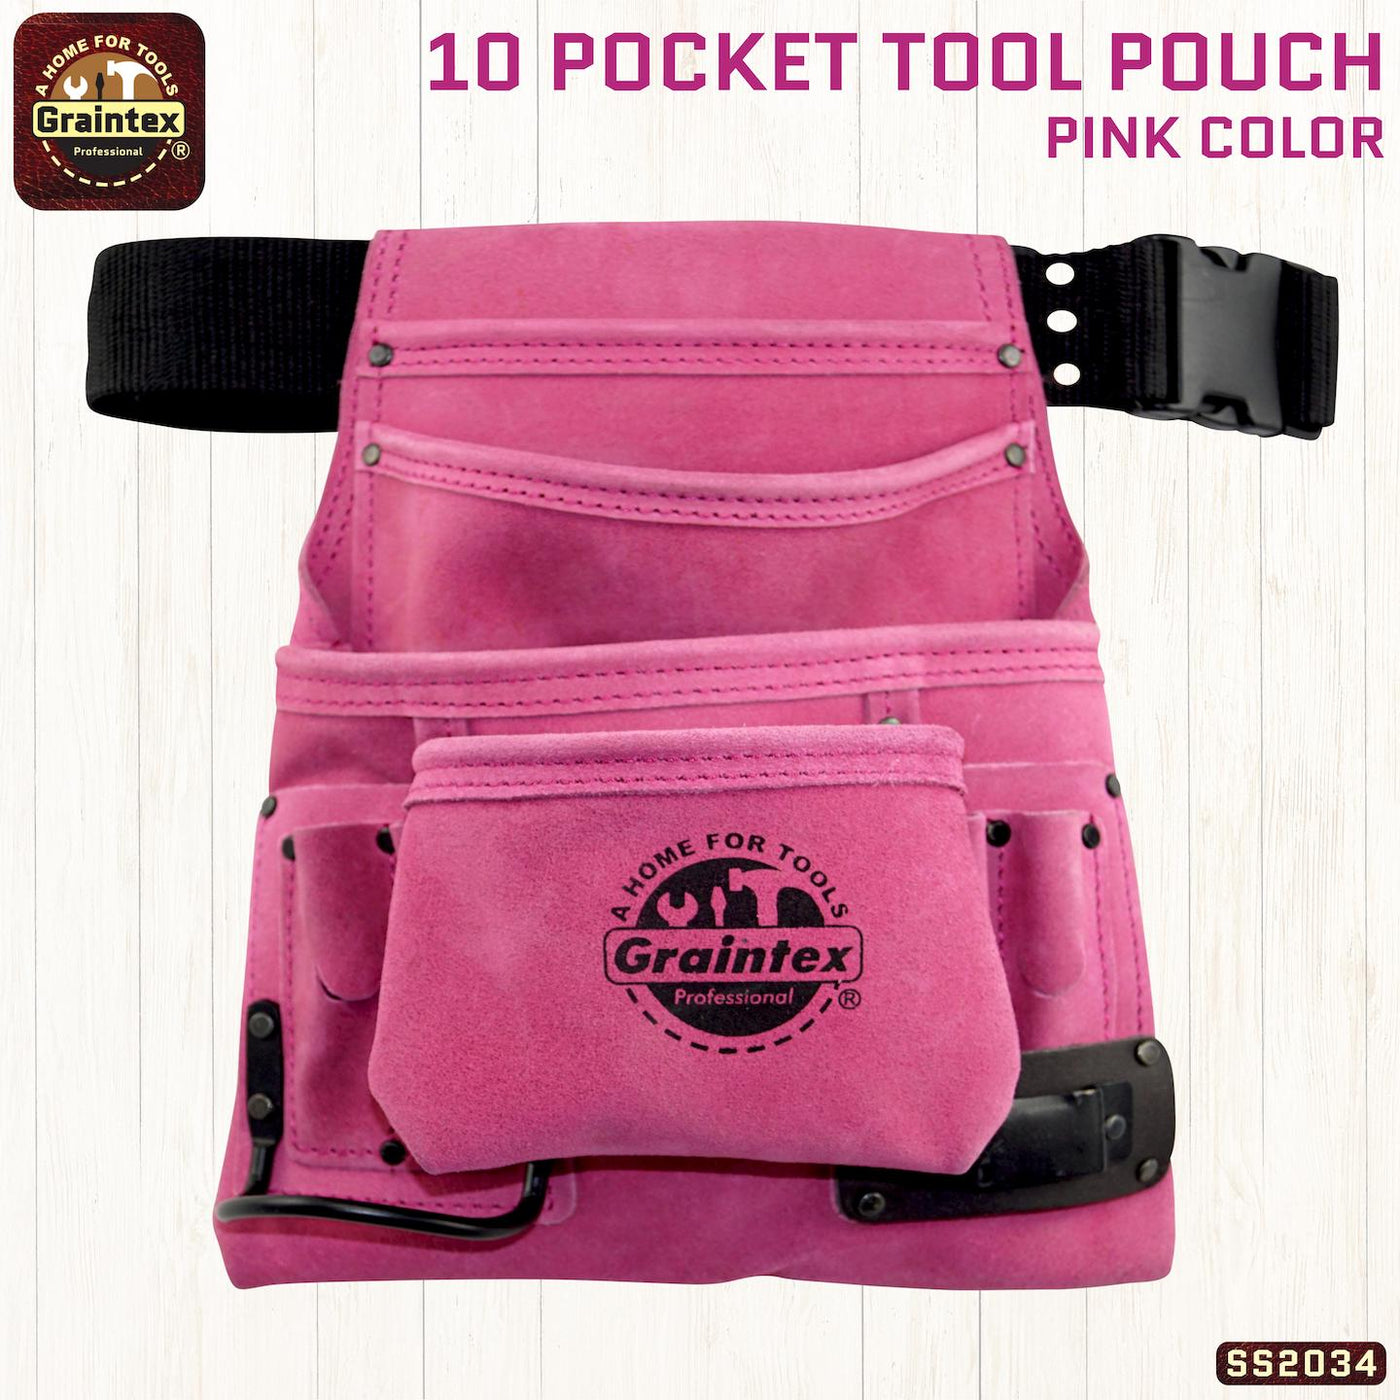 SS2034 :: 10 Pocket Nail & Tool Pouch Pink Color Suede Leather with Belt